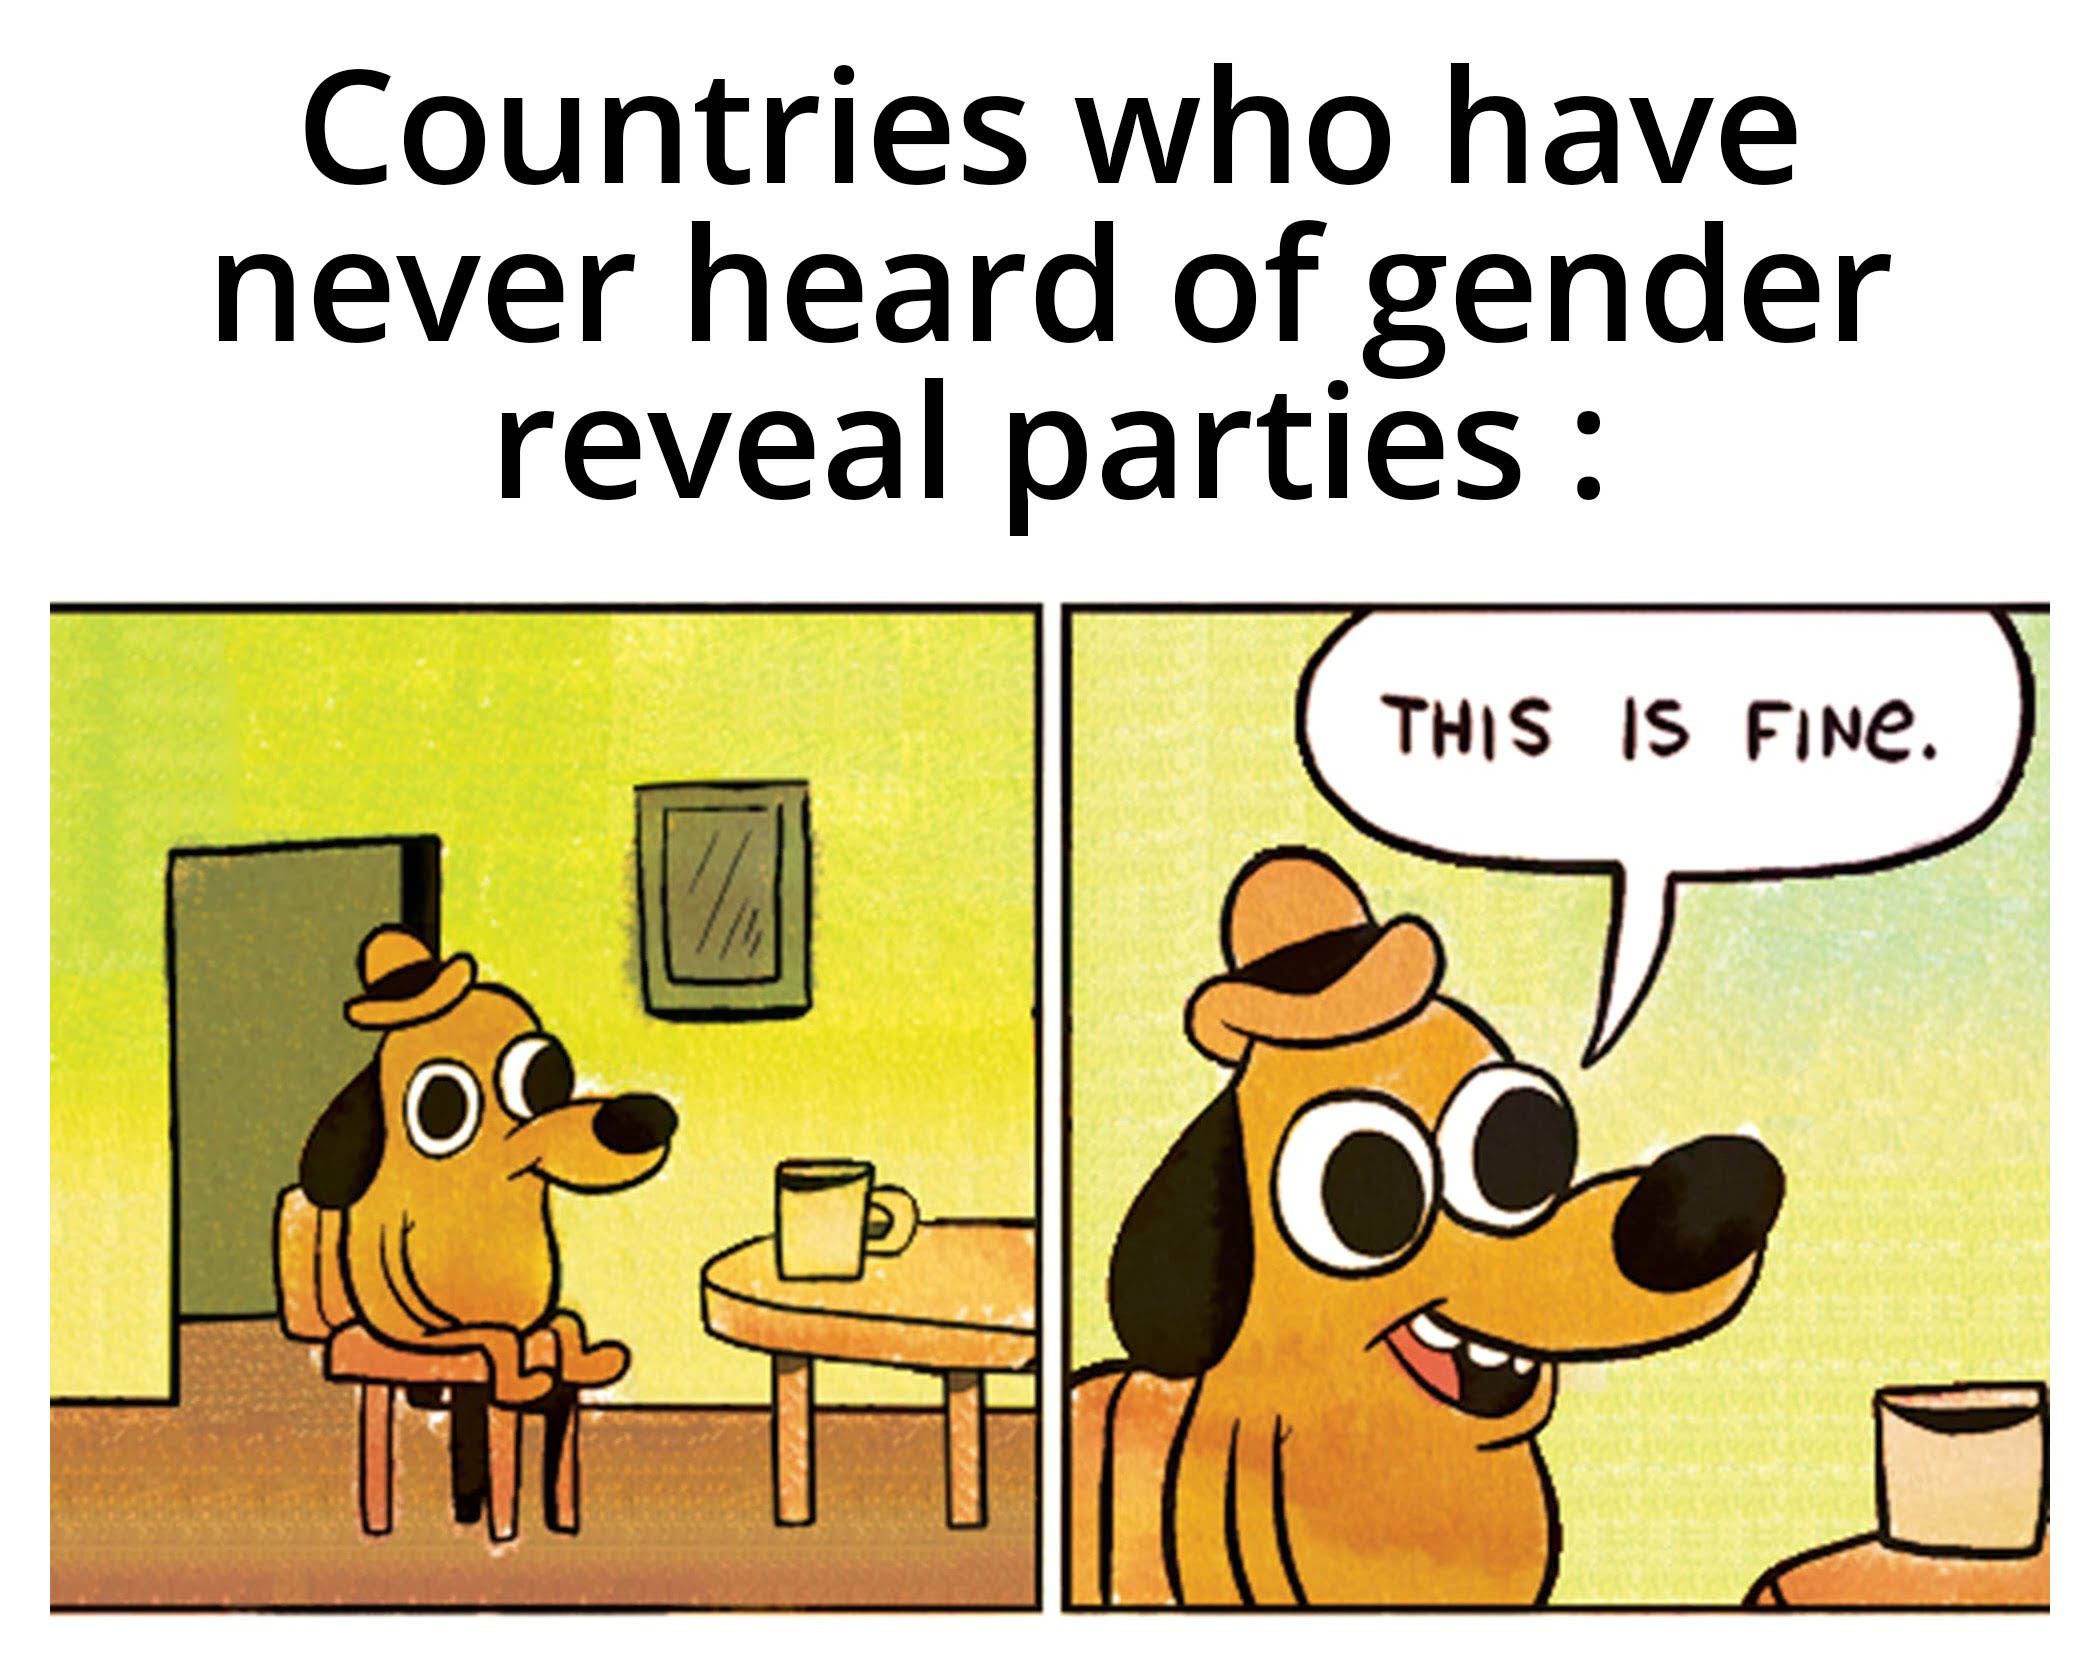 dank memes - meme this is fine -  Countries who have never heard of gender reveal parties This Is Fine.